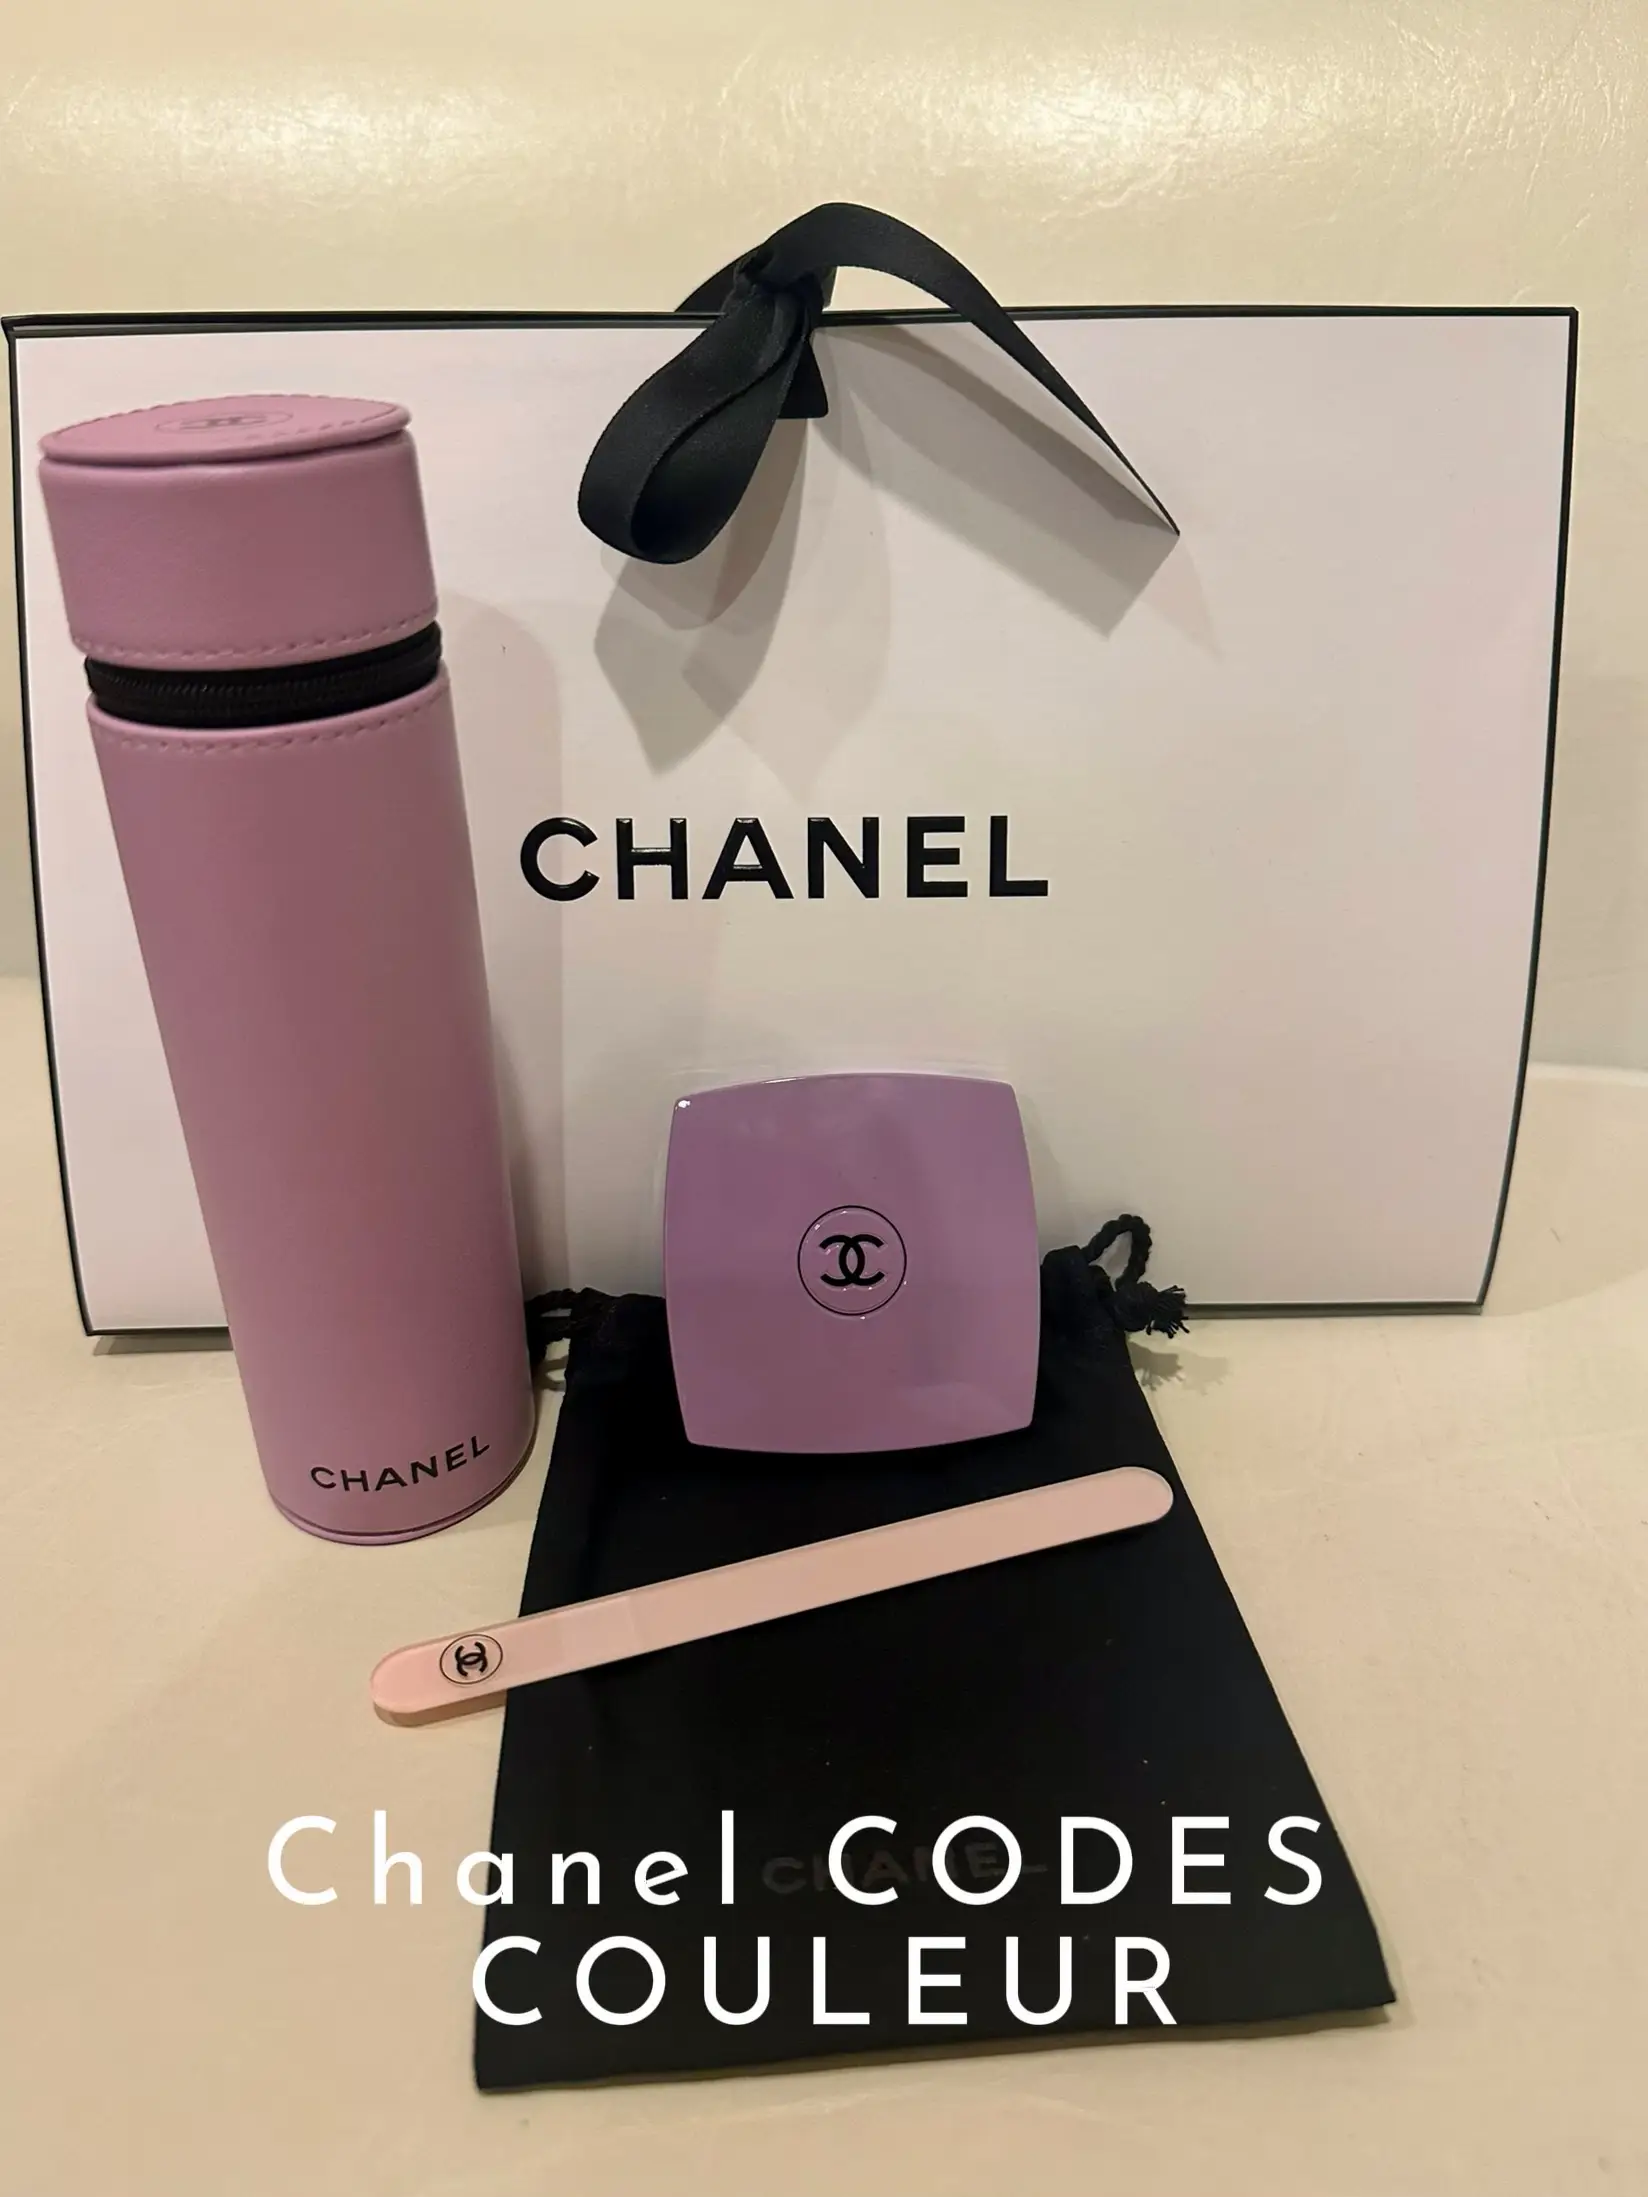 Chanel CODES COULEUR😍😍✨✨, Video published by Lazy review